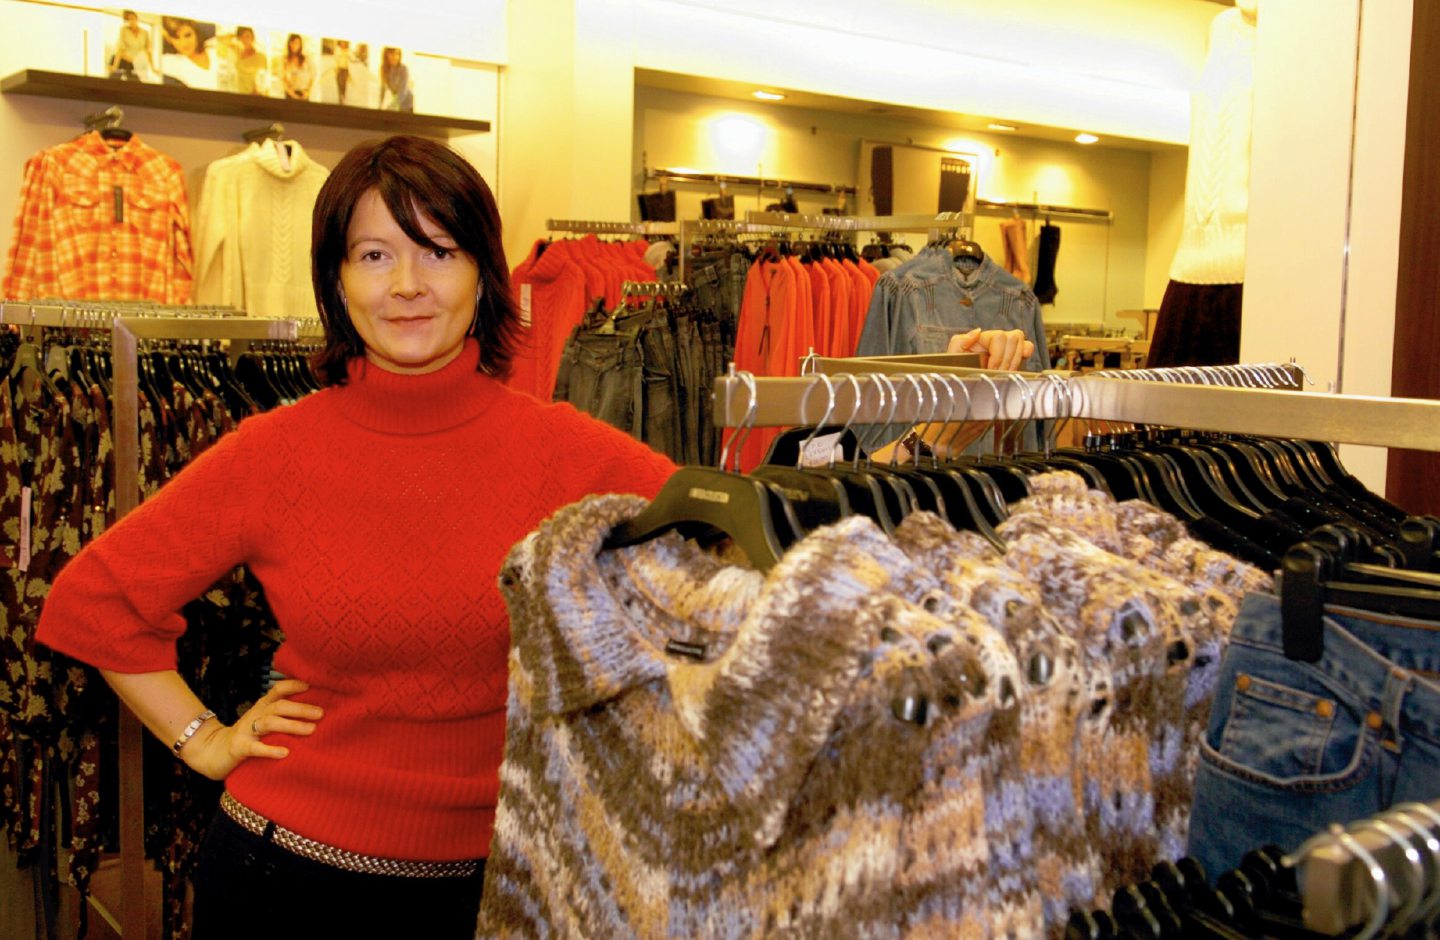 A woman standing among the clothing rails